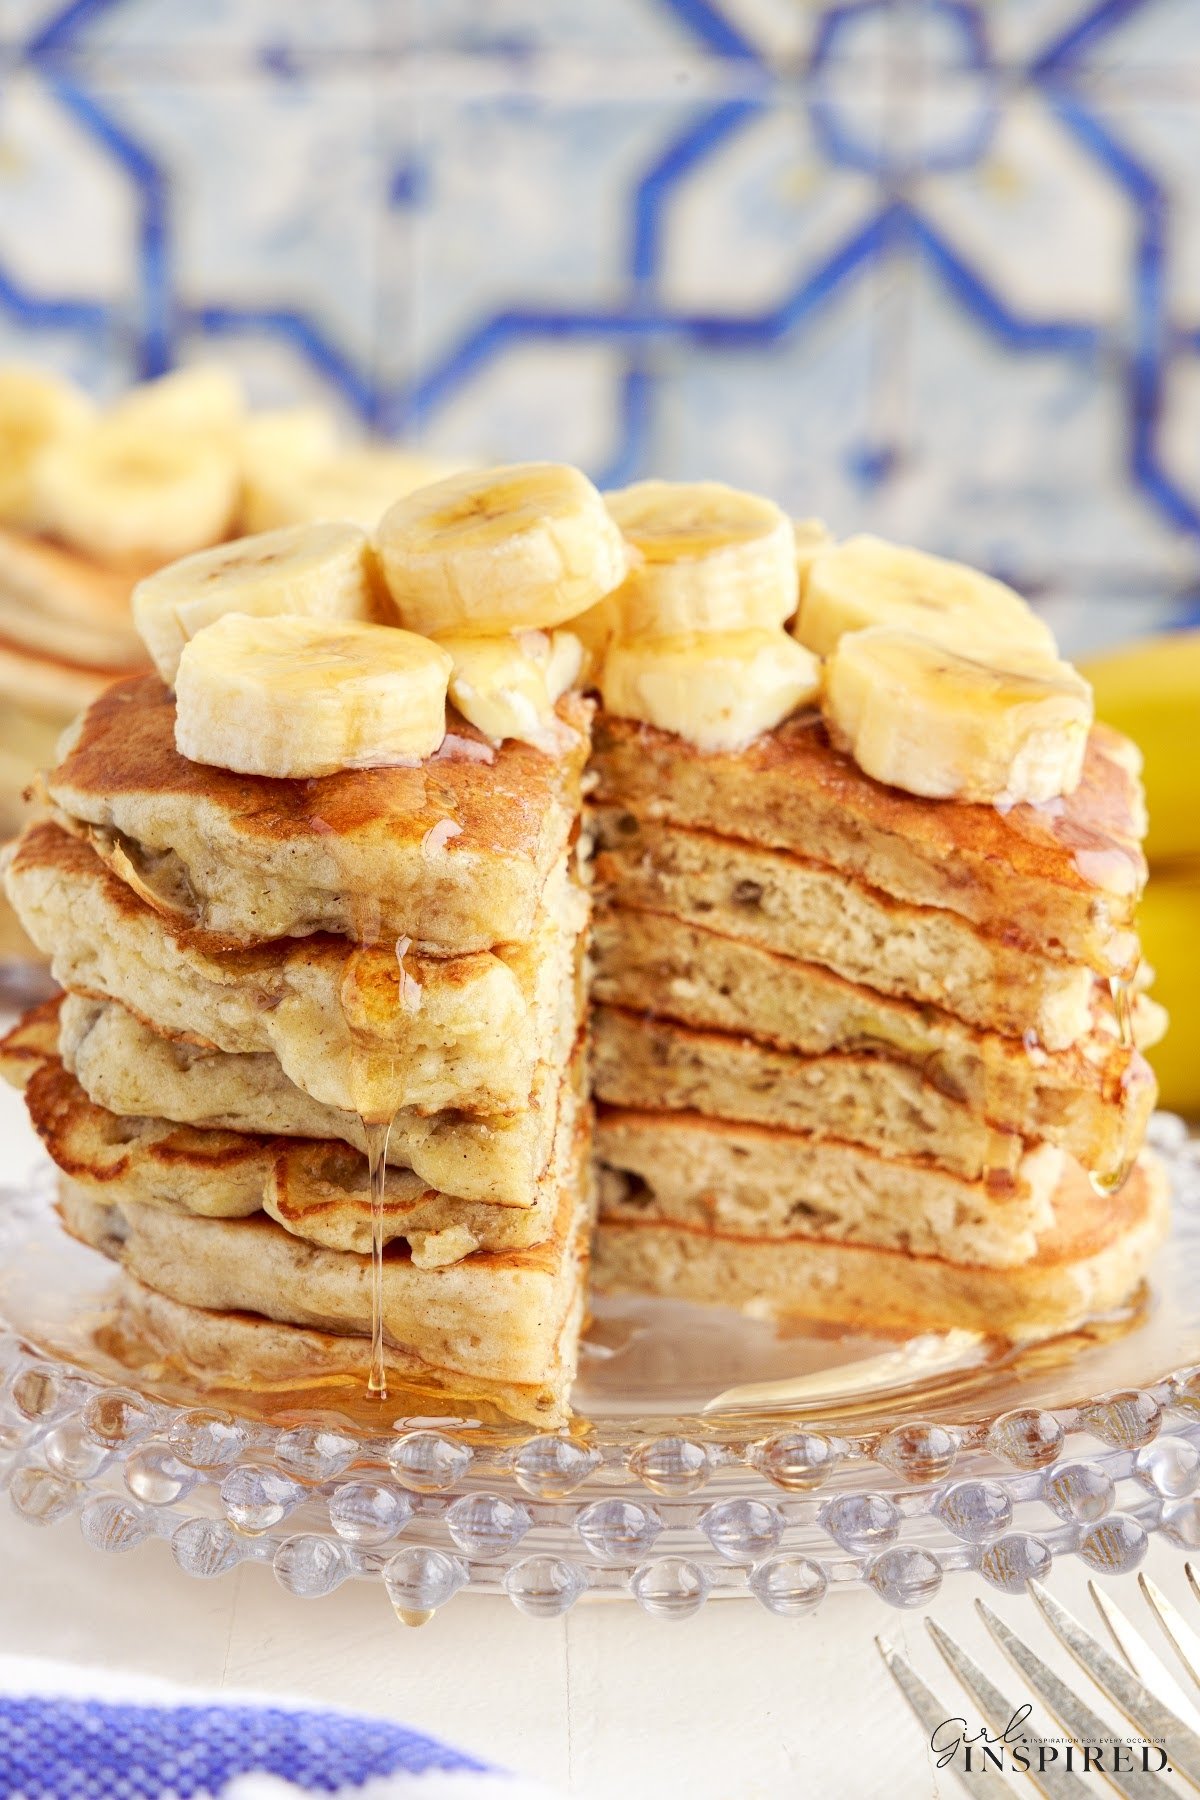 A stack of banana buttermilk pancakes topped with bananas with a slice taken from them.